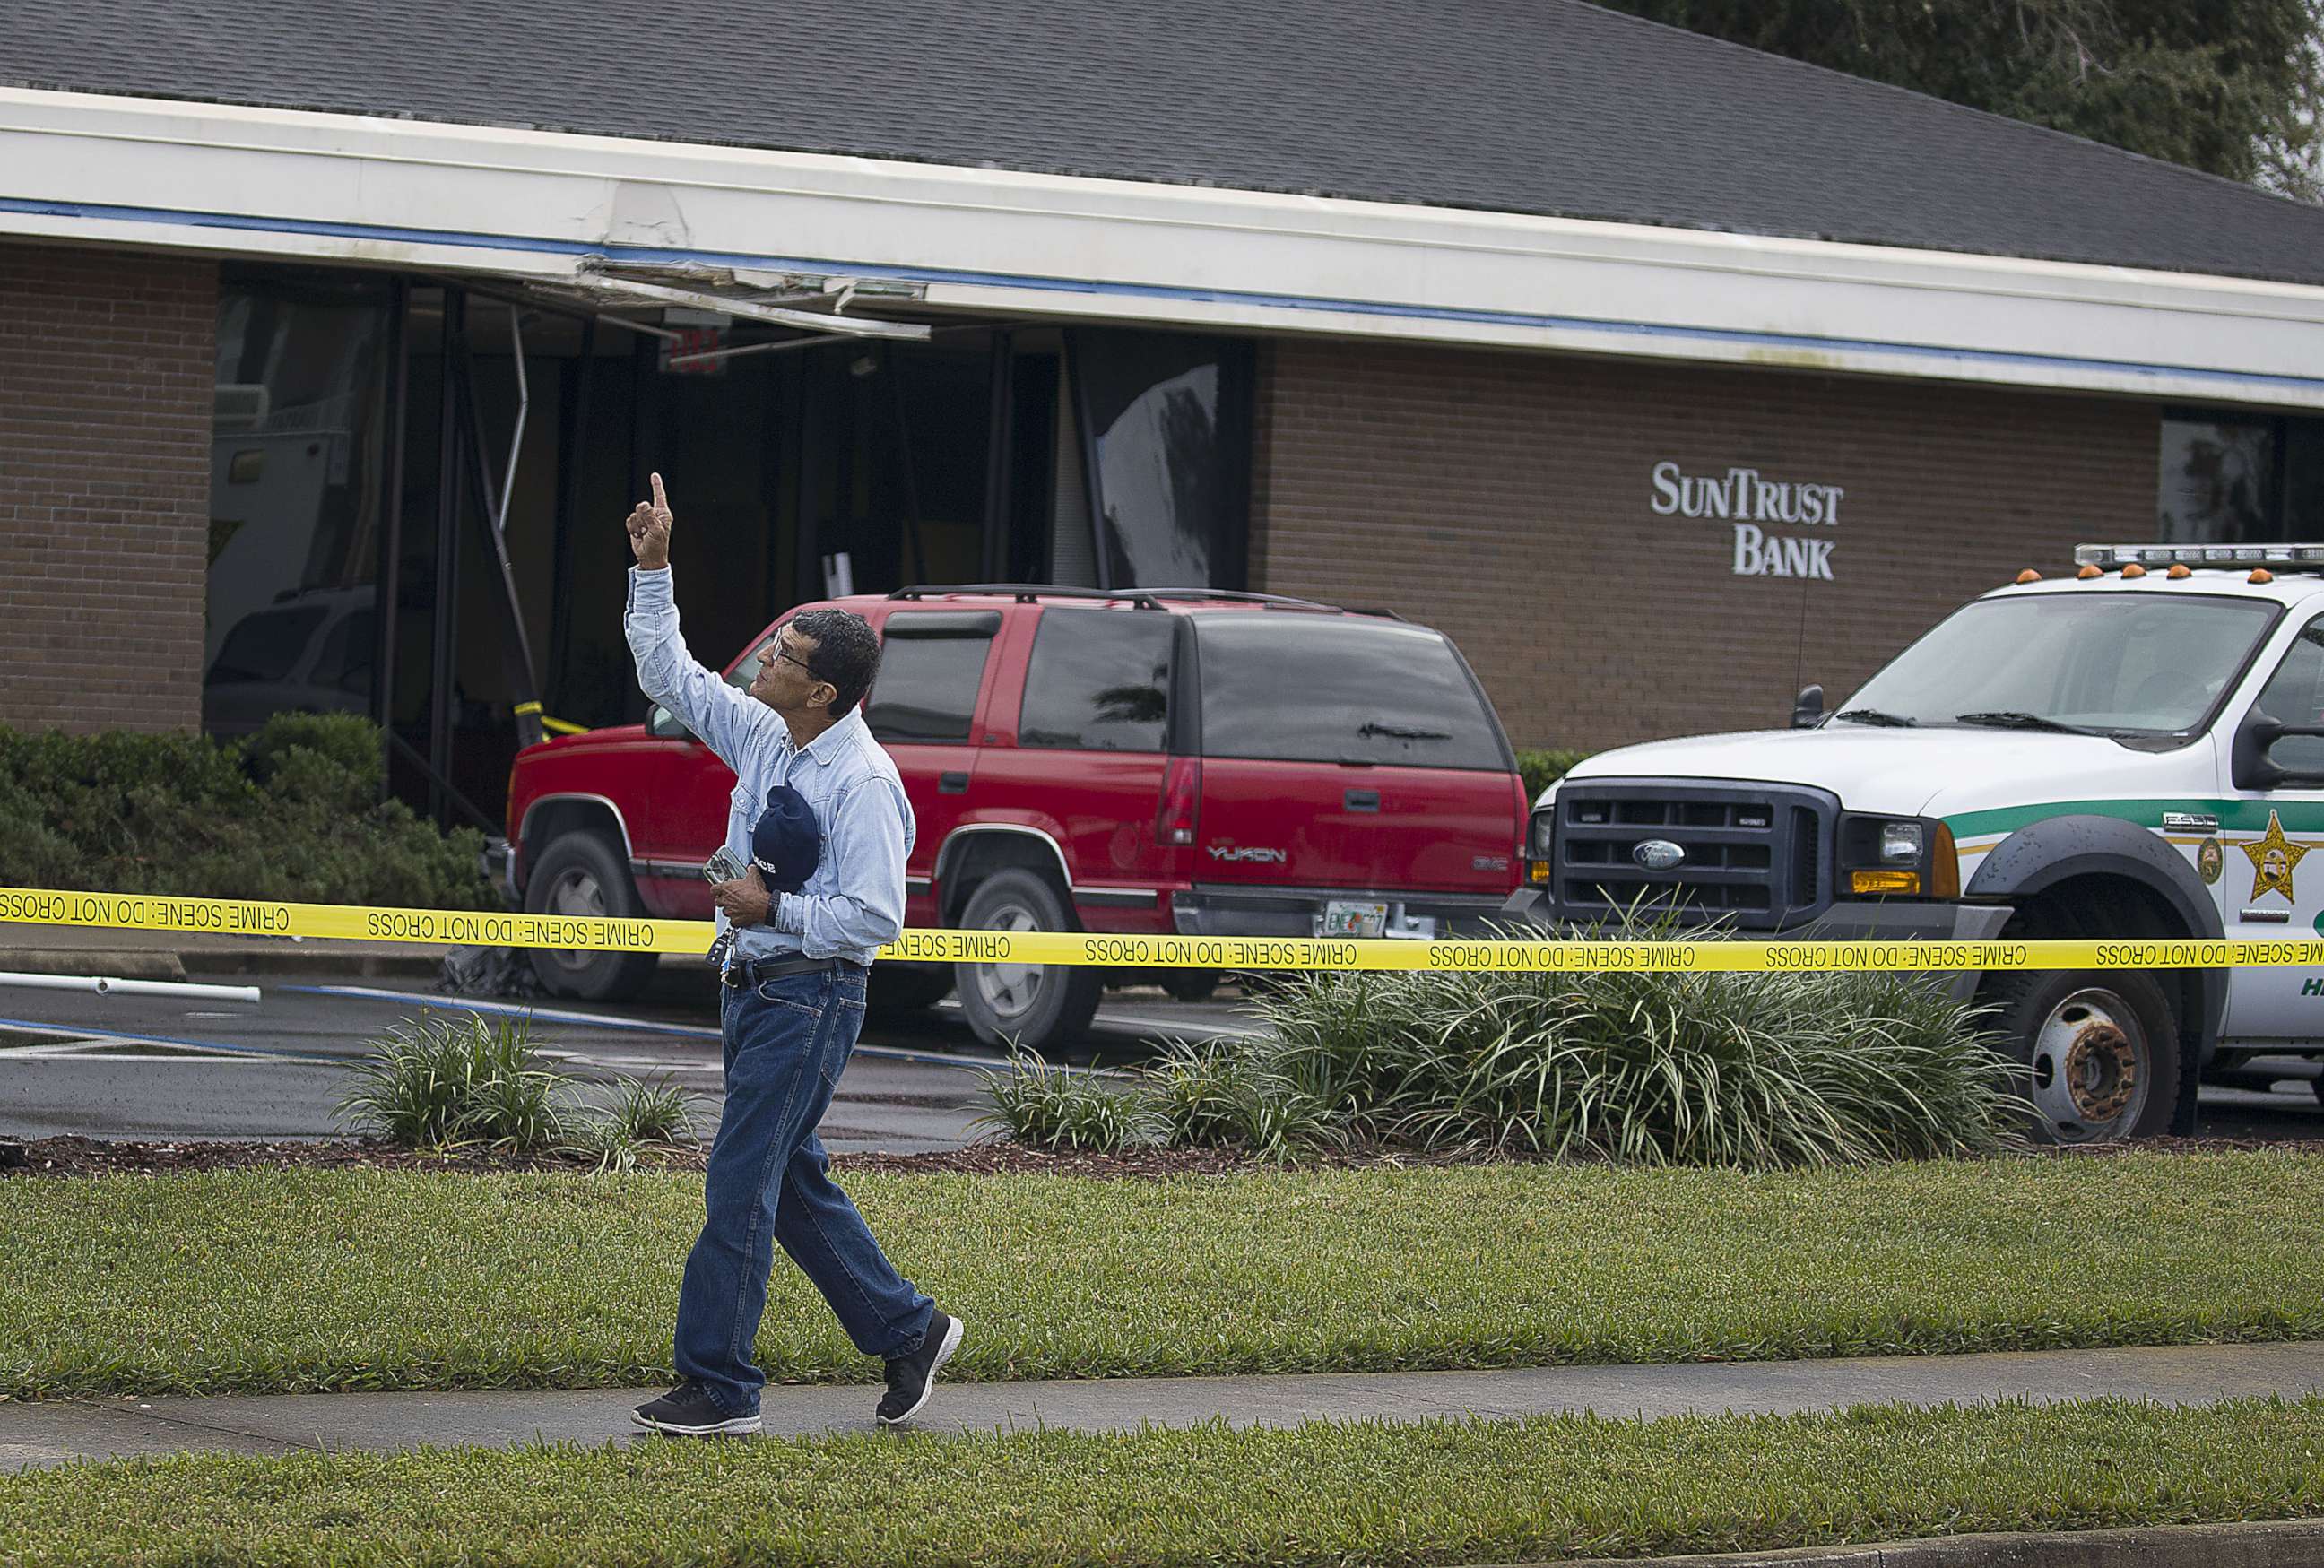 PHOTO: Jose Sanchez points to the sky as he walks in front of the SunTrust Bank branch where he said his friend was killed yesterday along with four other people on Jan. 24, 2019 in Sebring, Fla.